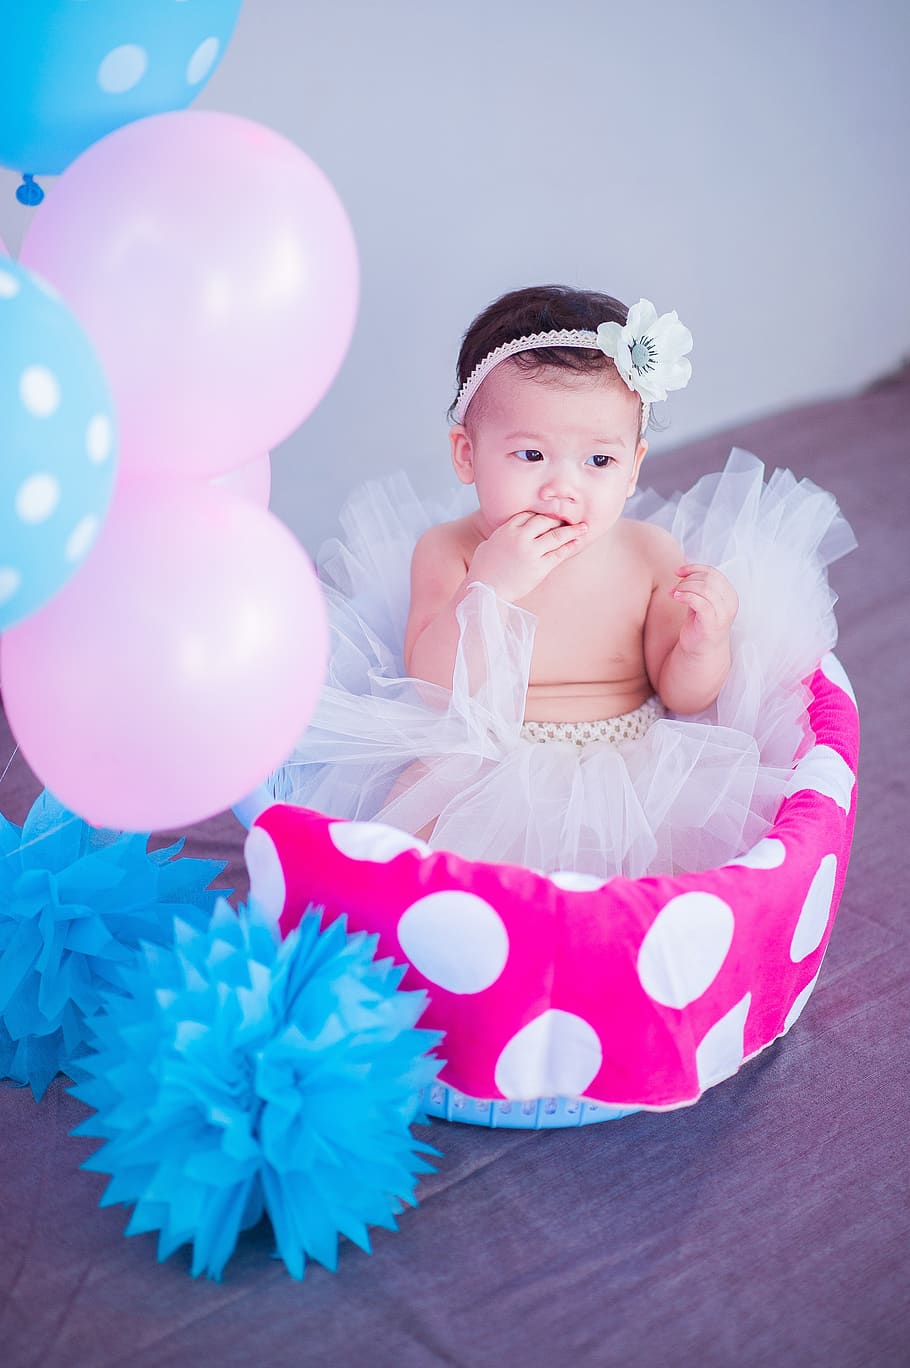 Baby Sitting on White and Pink Polka-dot Basket With Balloons, HD wallpaper